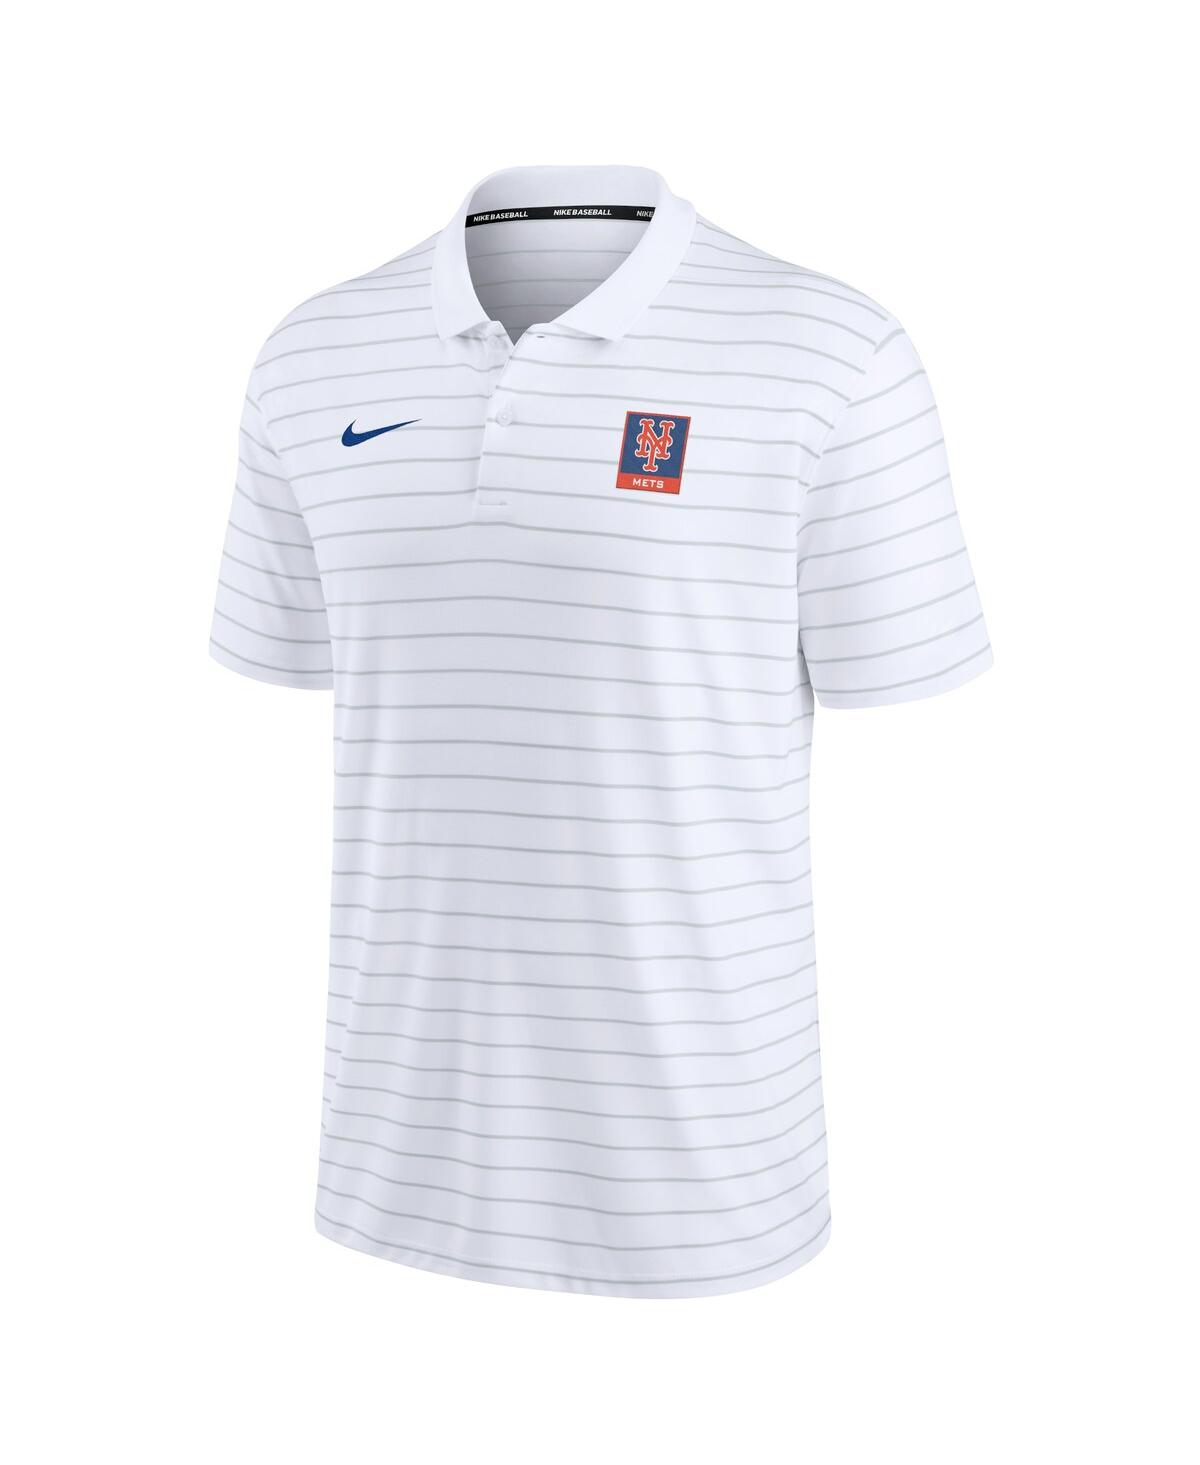 Shop Nike Men's  White New York Mets Authentic Collection Striped Performance Pique Polo Shirt